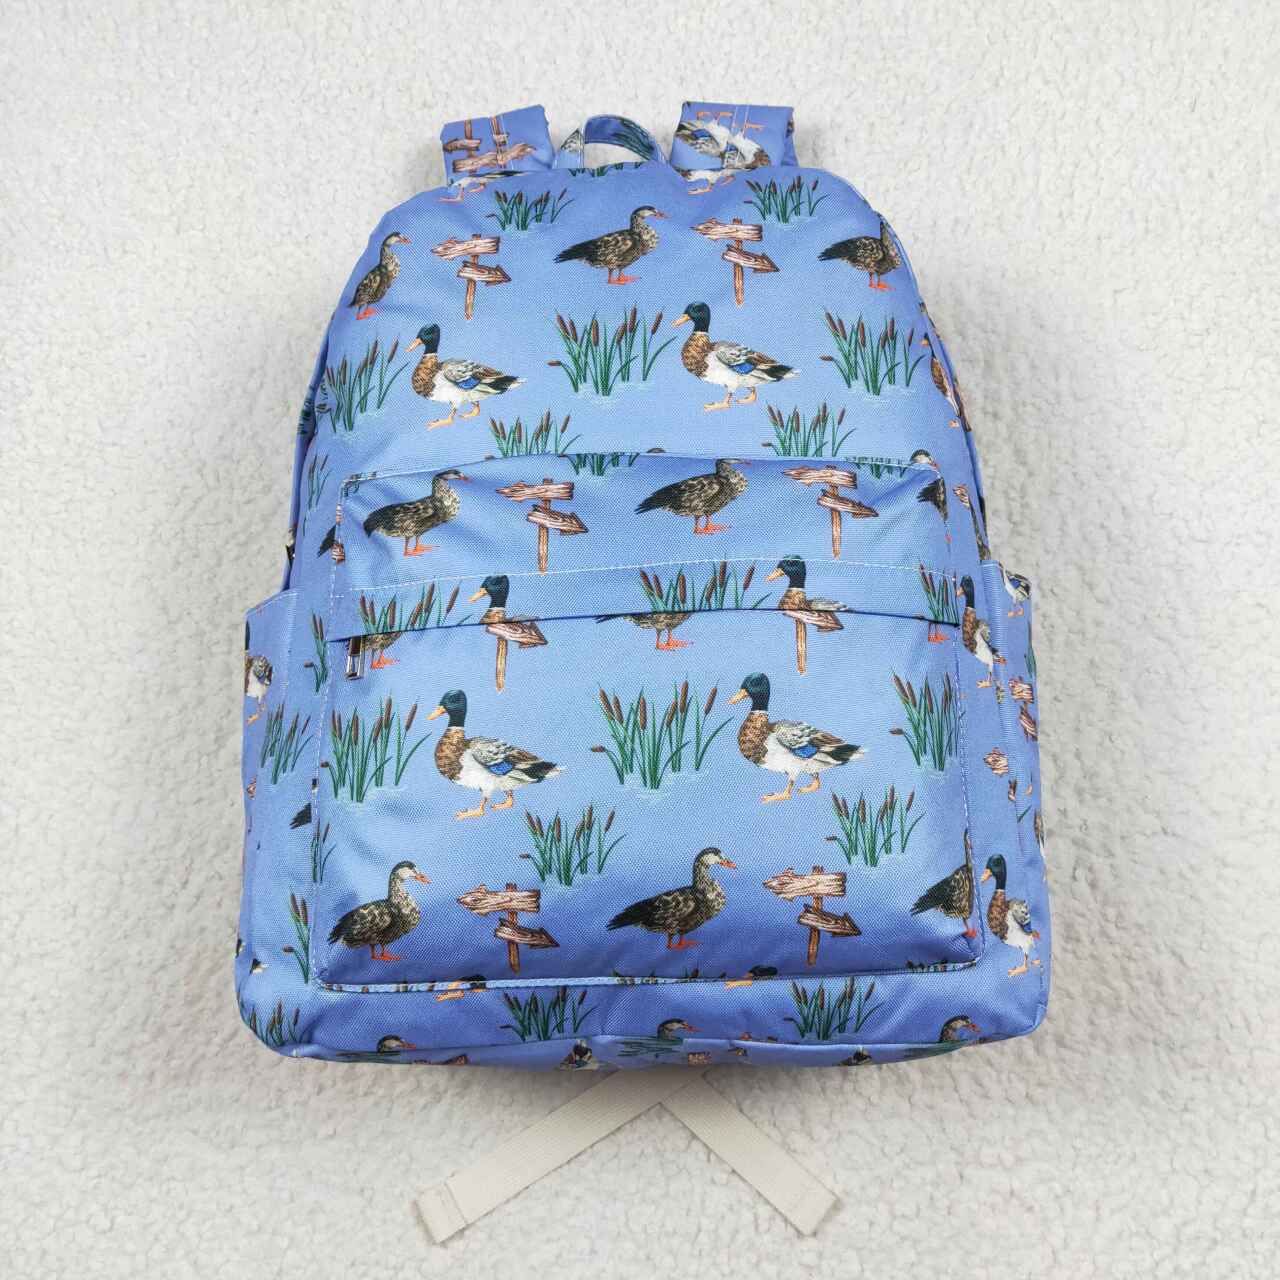 RTS no moq BA0200 Duck blue and purple backpack